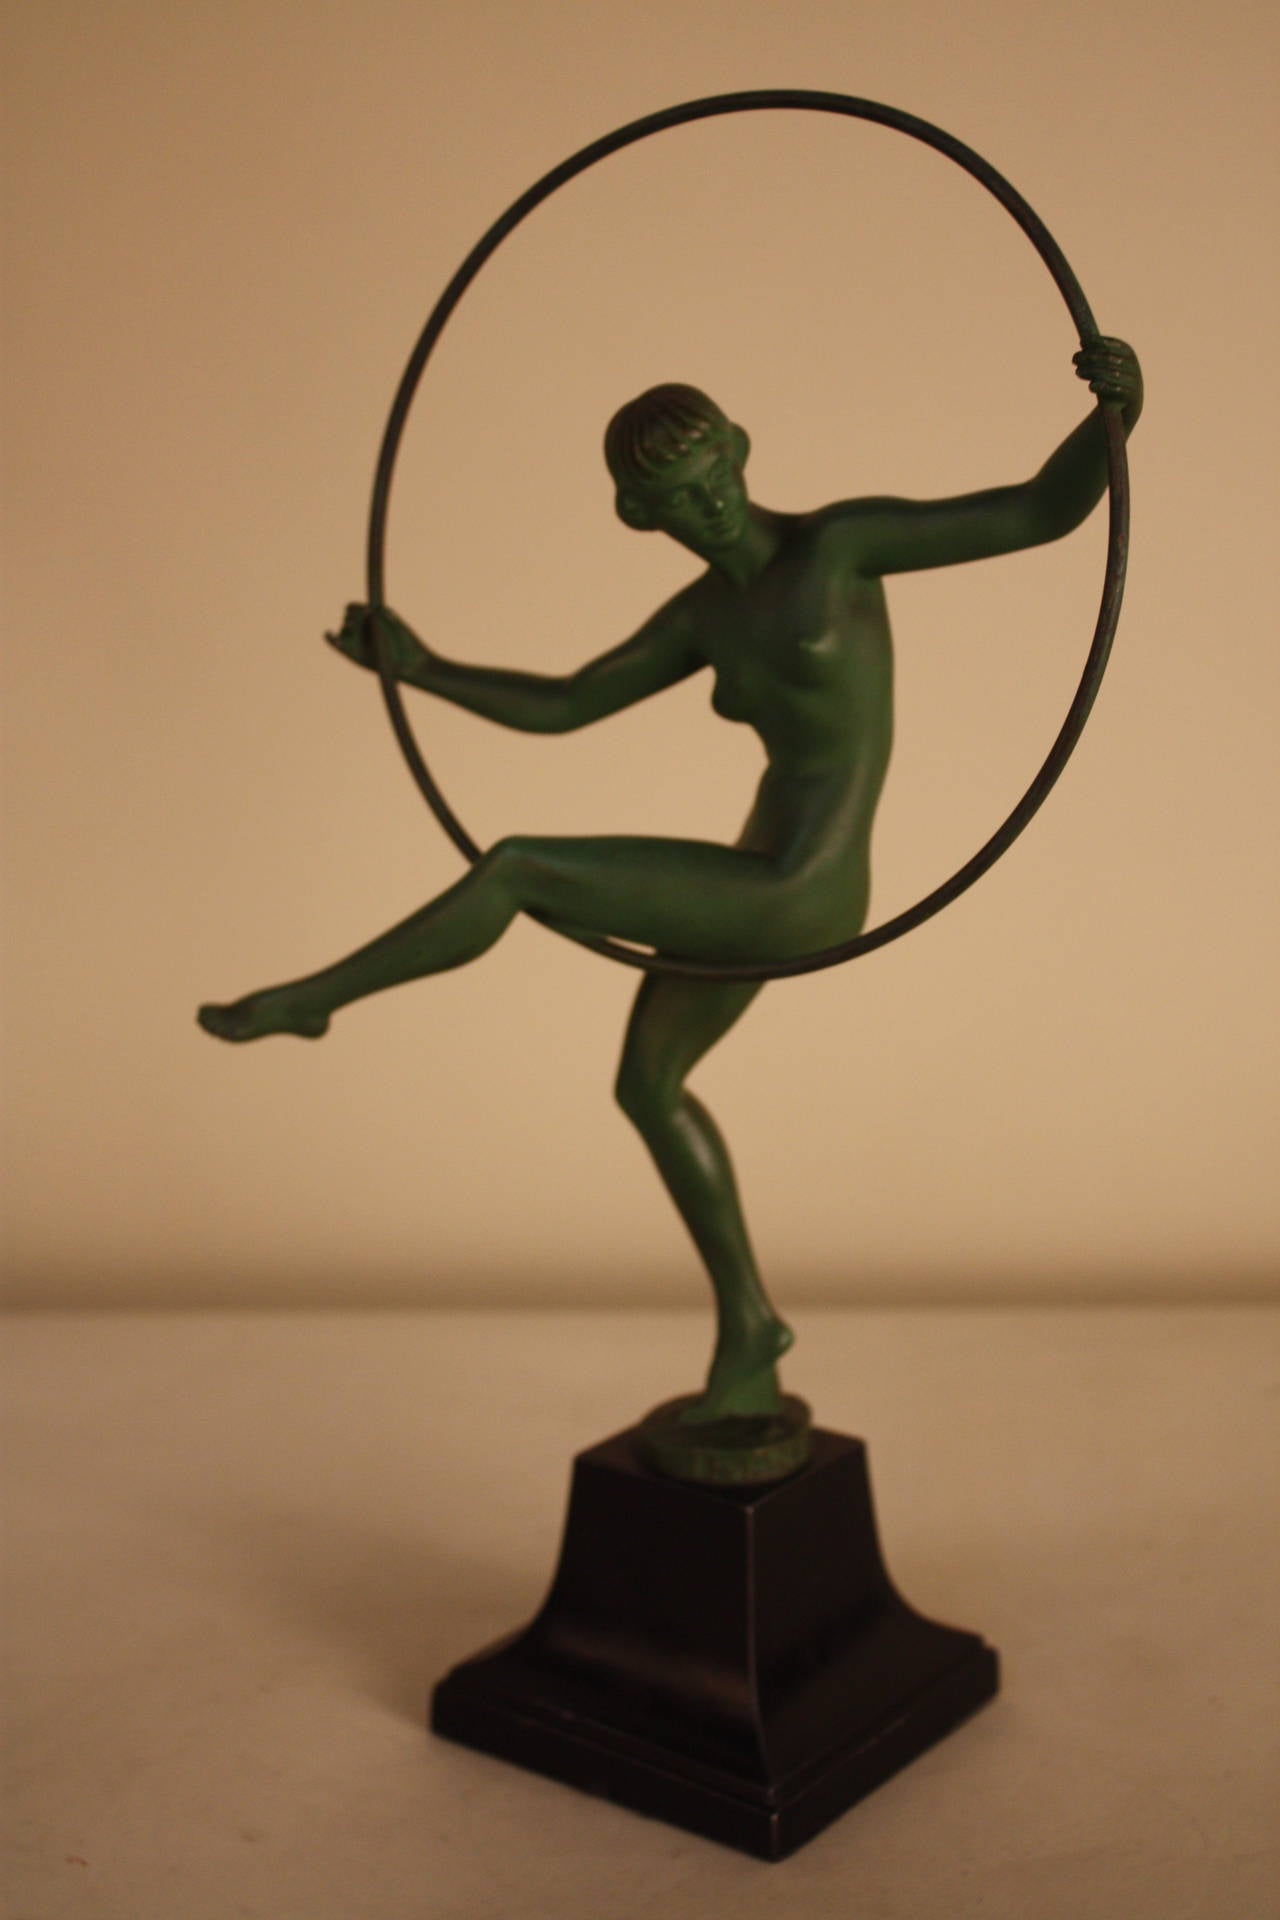 Delightful French Art Deco hoop dancer statue, circa 1920s from the Max Le Verrier Foundry and signed Briand.